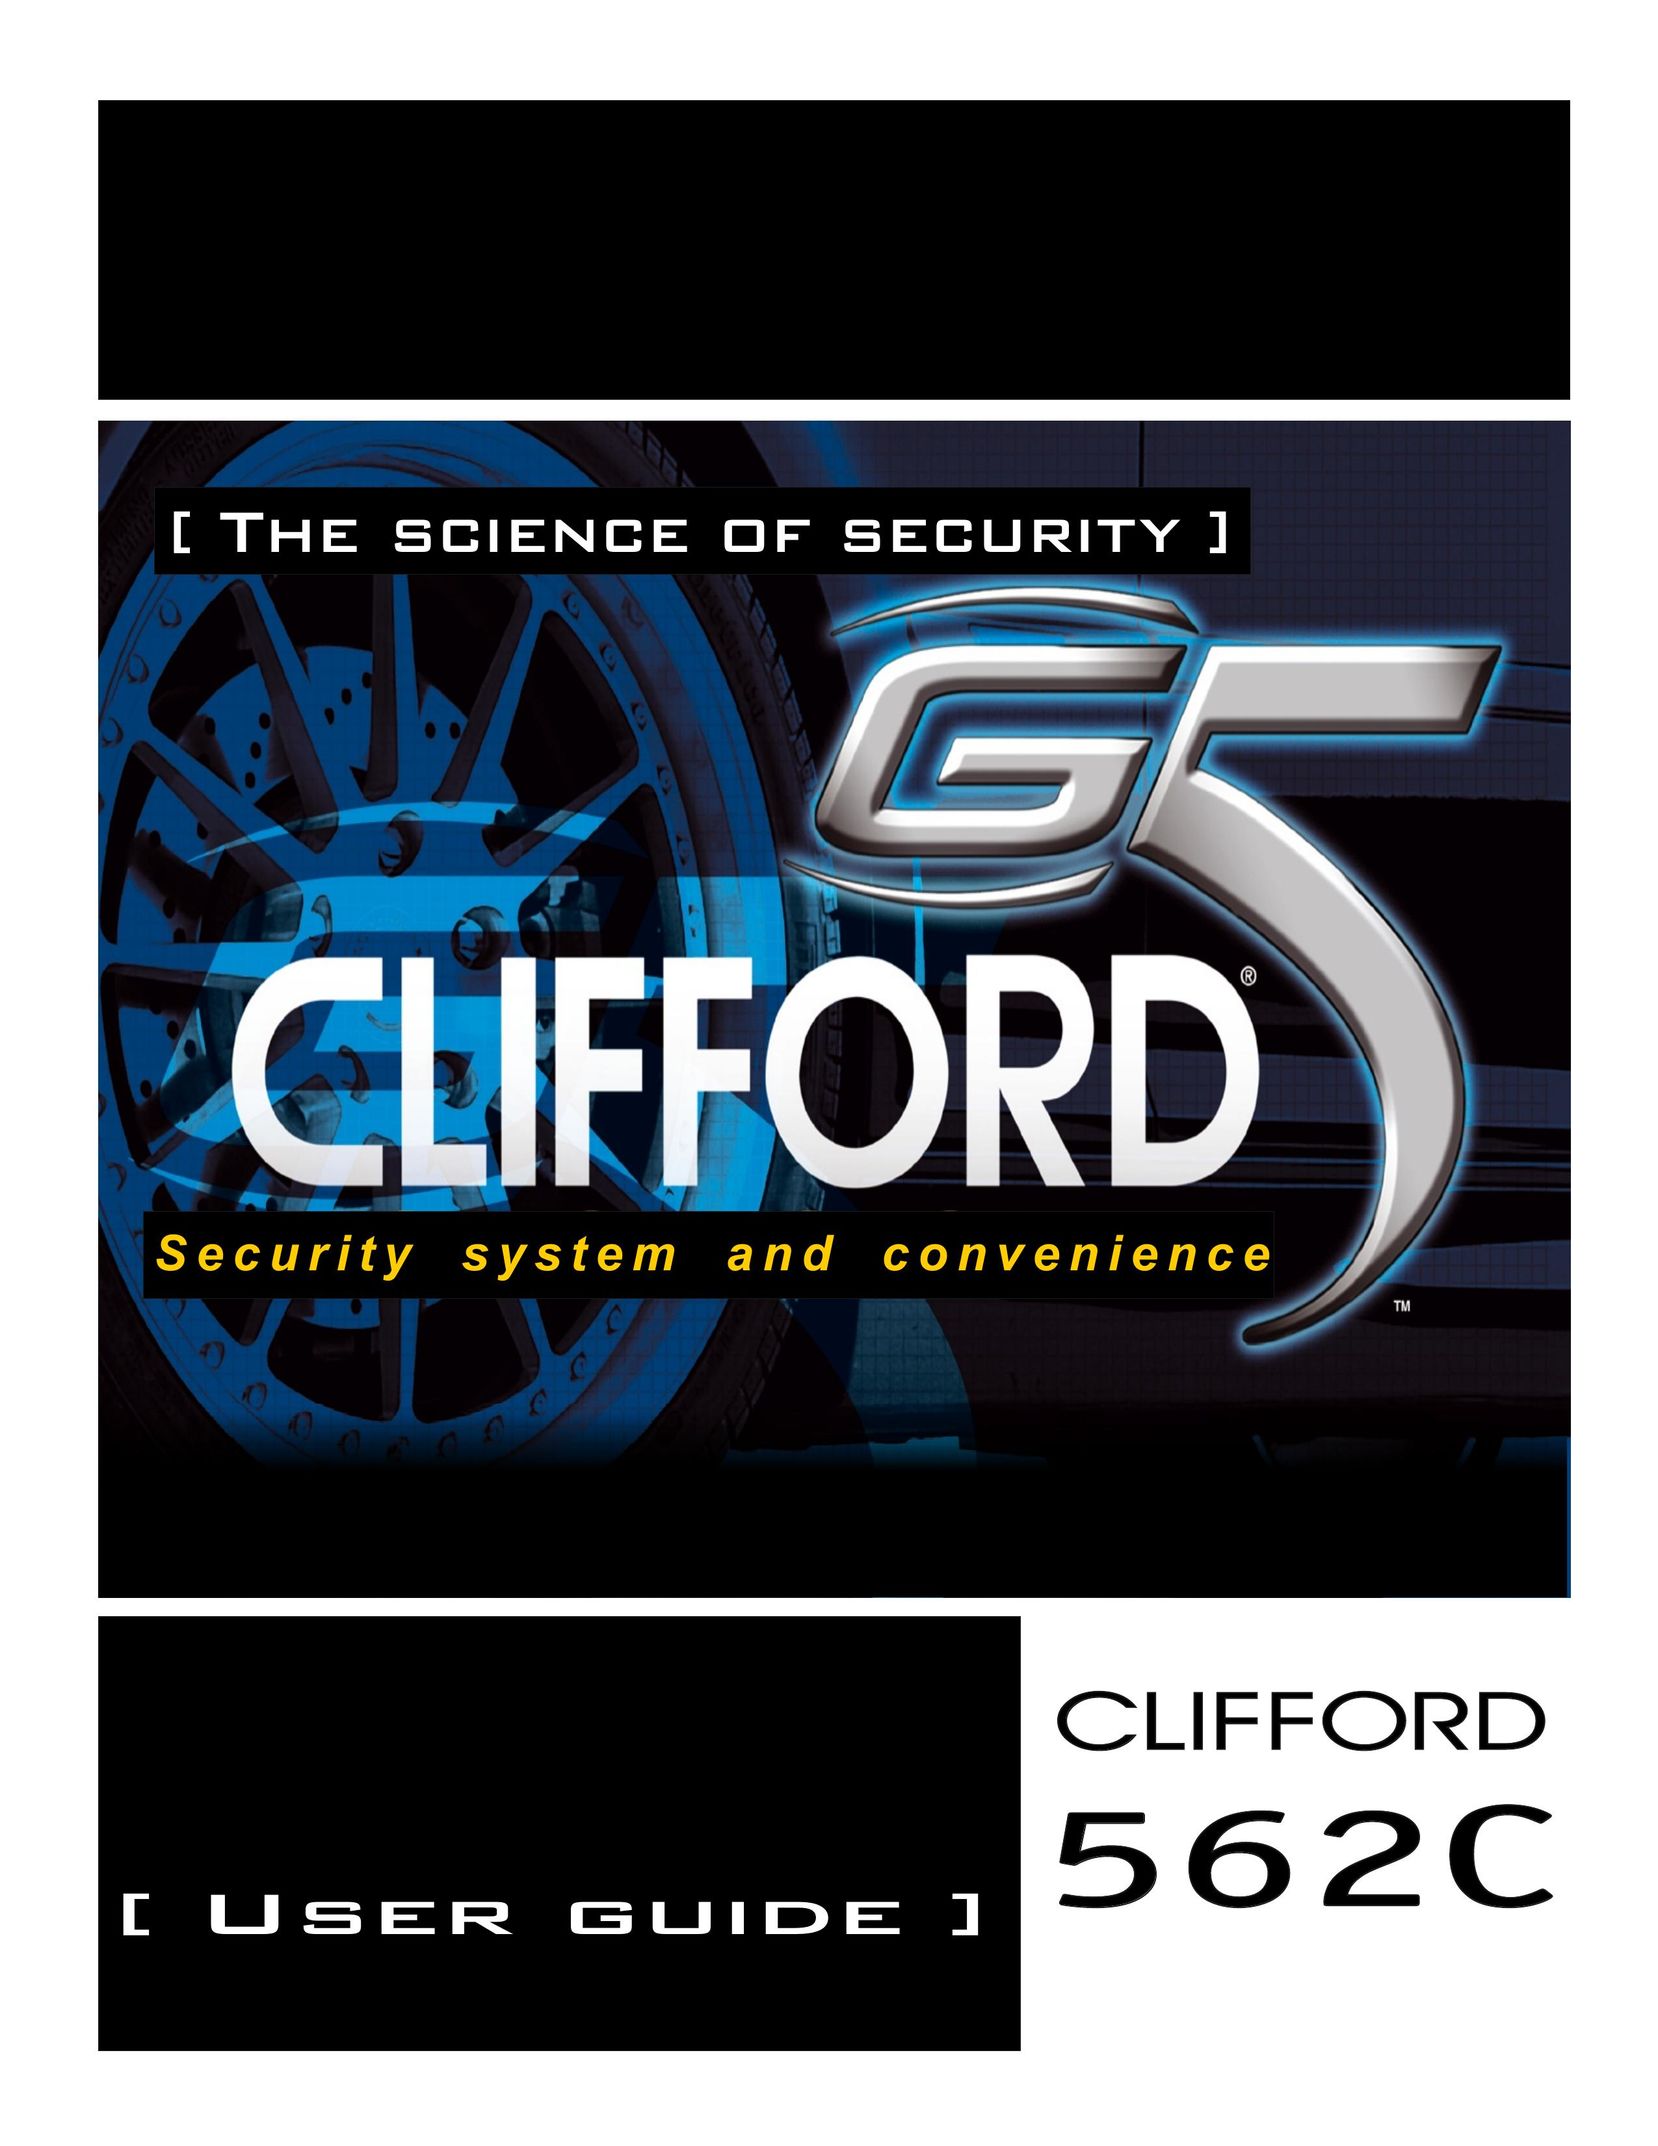 Clifford 562C Home Security System User Manual